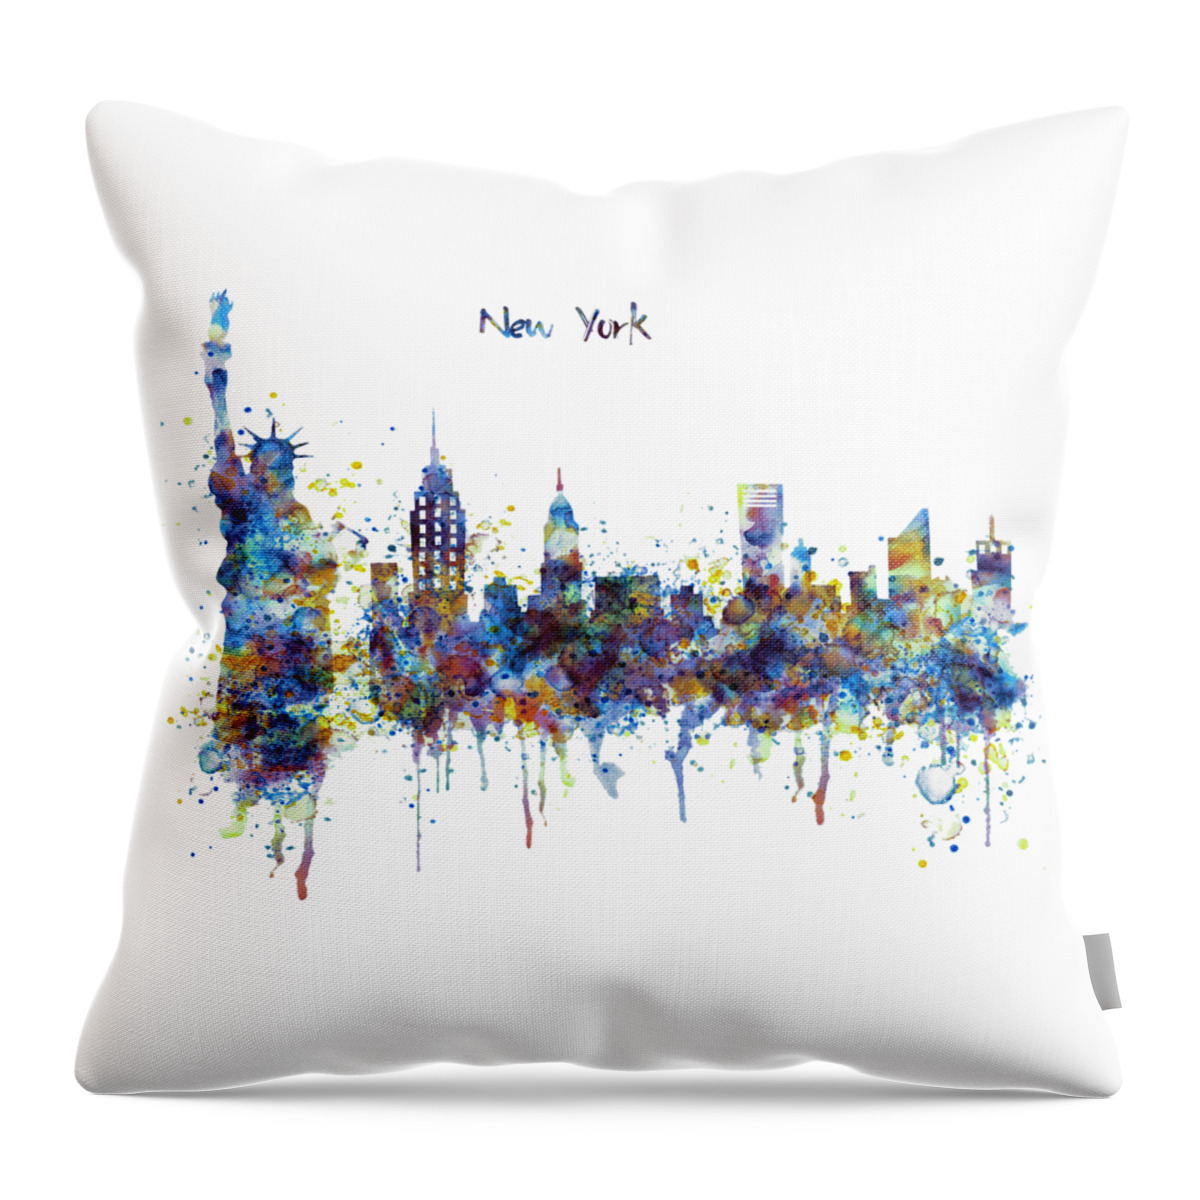 New York Throw Pillow featuring the painting New York Watercolor Skyline by Marian Voicu